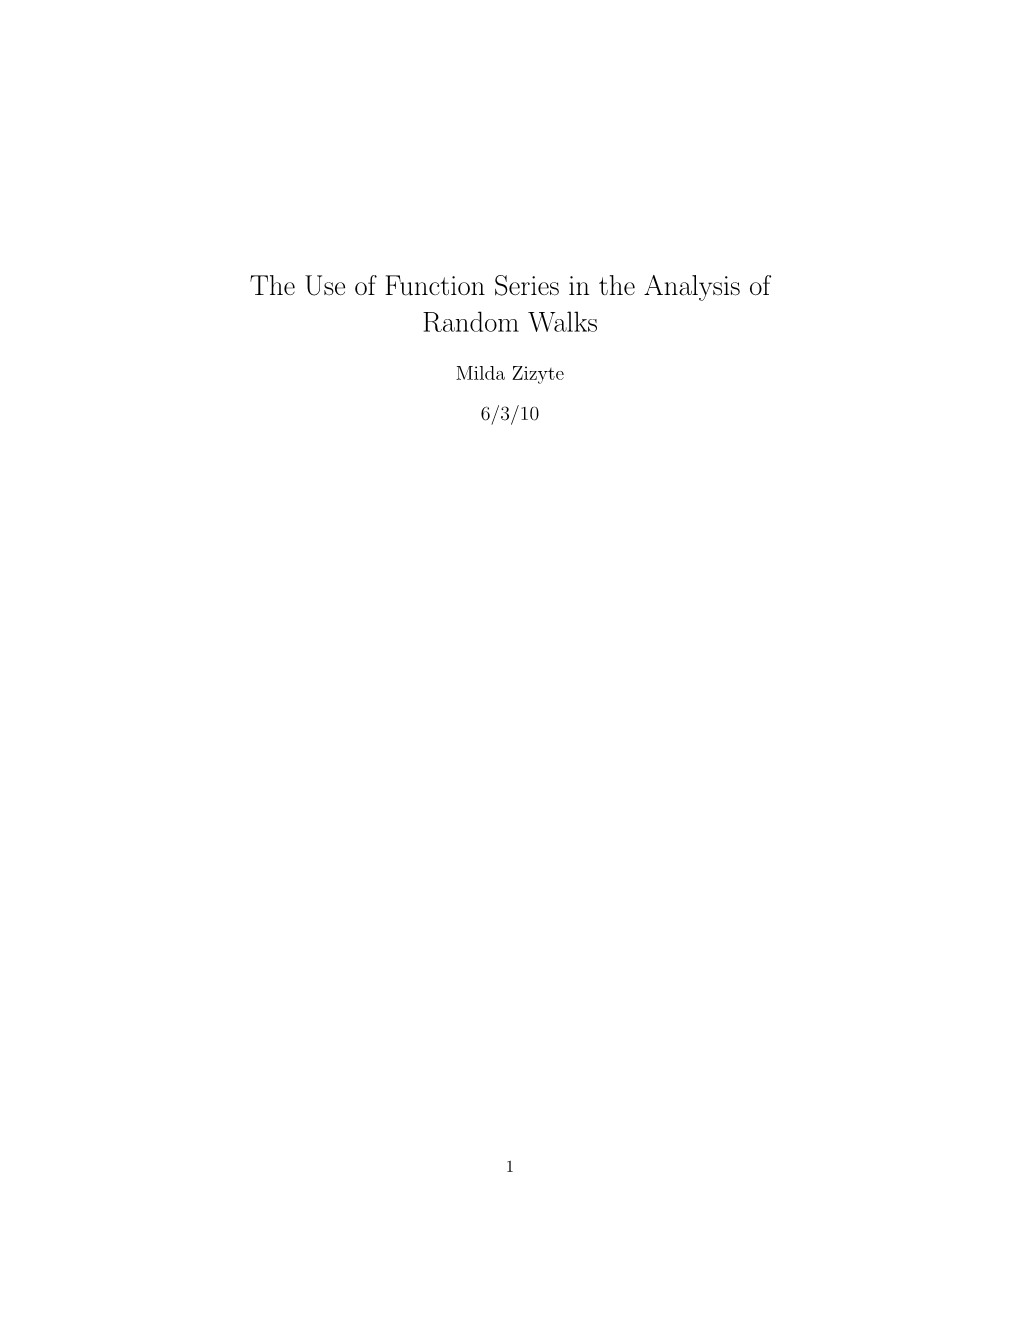 The Use of Function Series in the Analysis of Random Walks